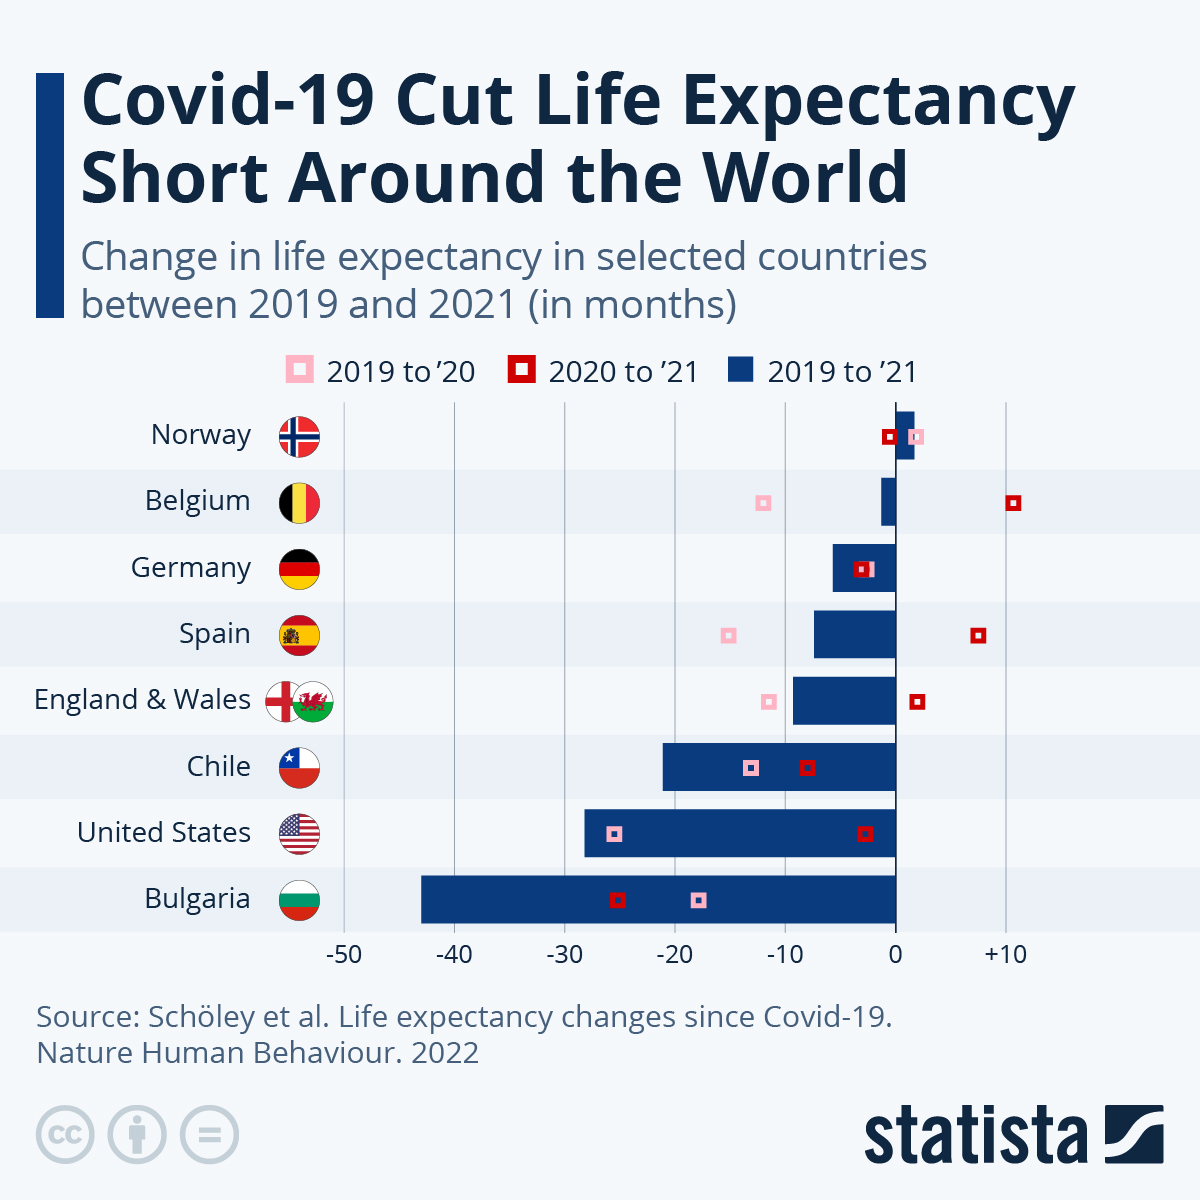 Covid-19 cut life expectancy short around the world